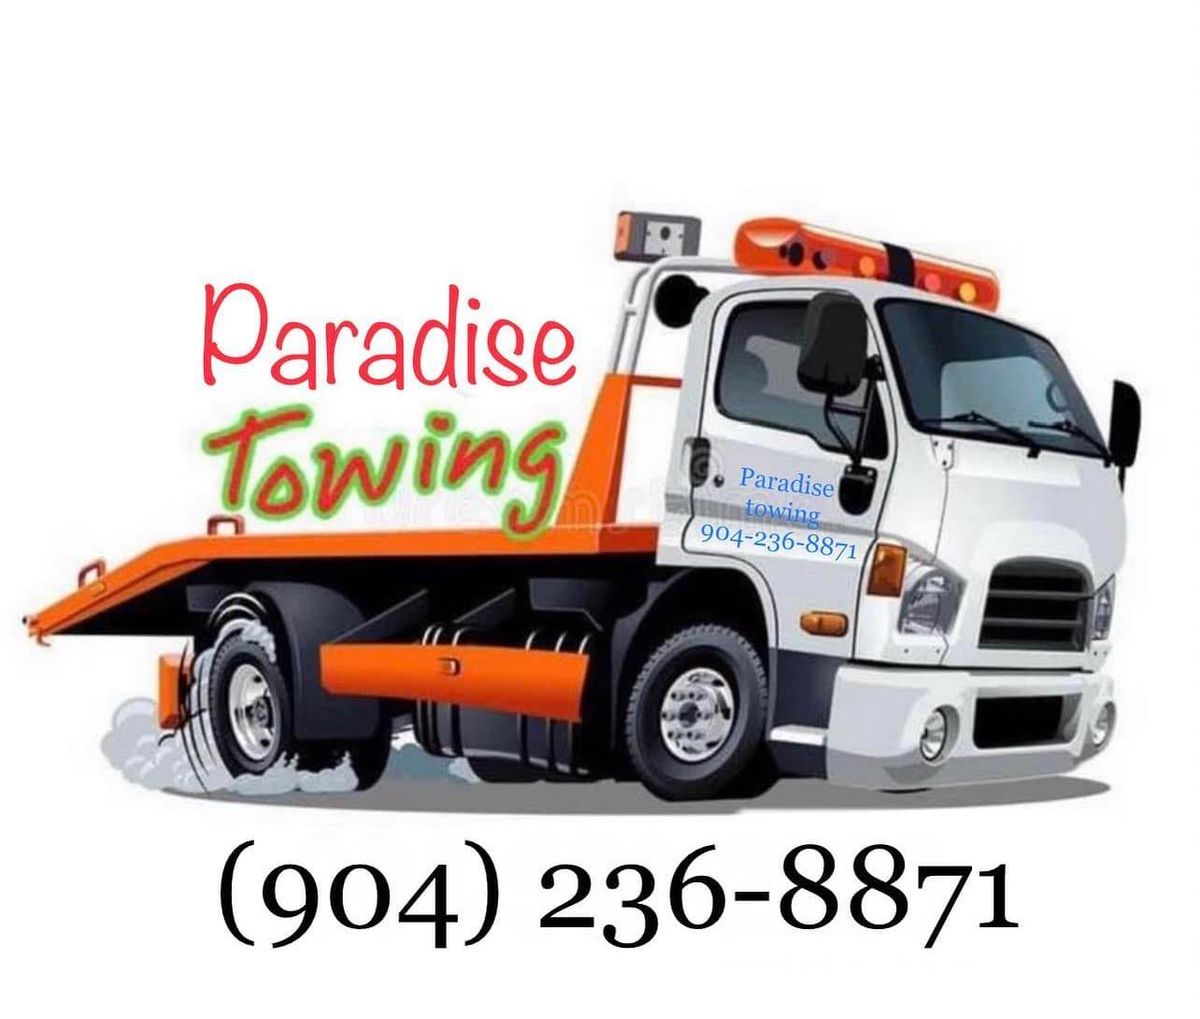 20% off all towing service and roadside assistance 